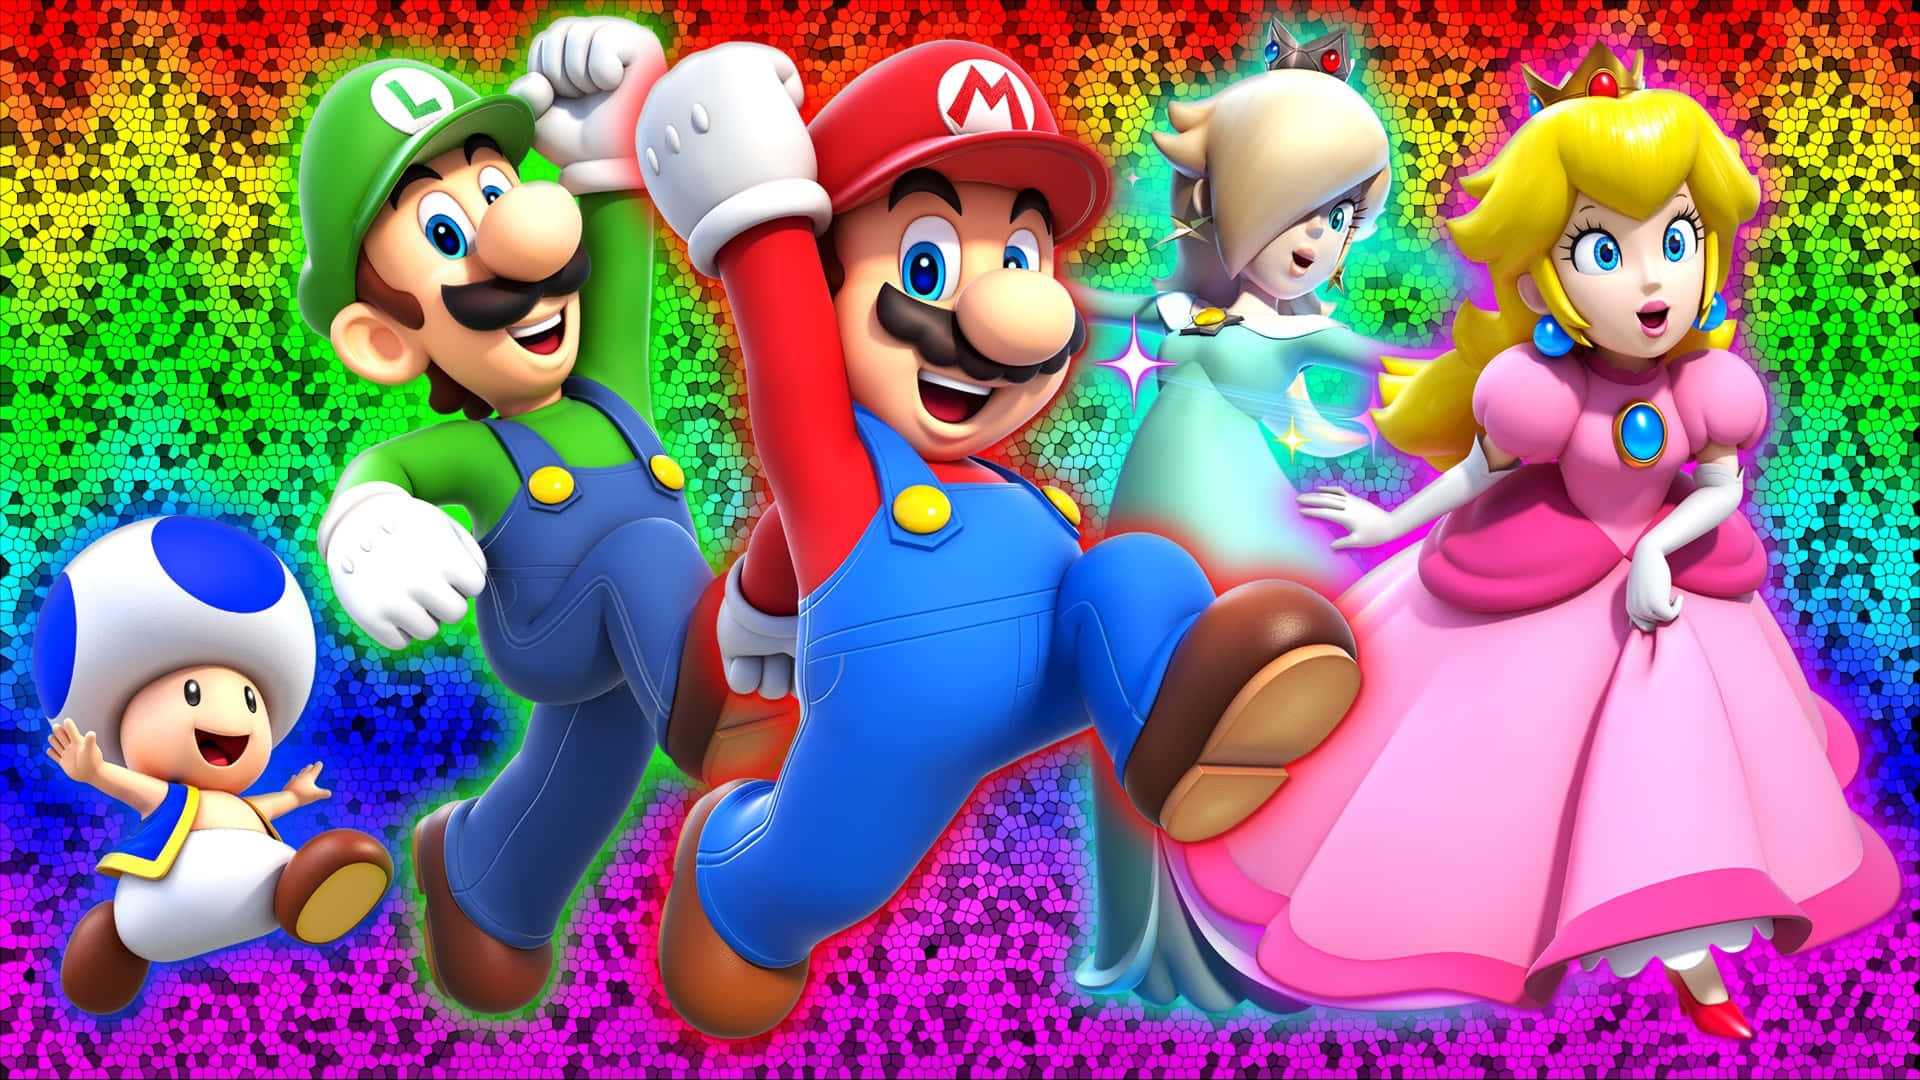 Exciting Group of Super Mario Characters Wallpaper